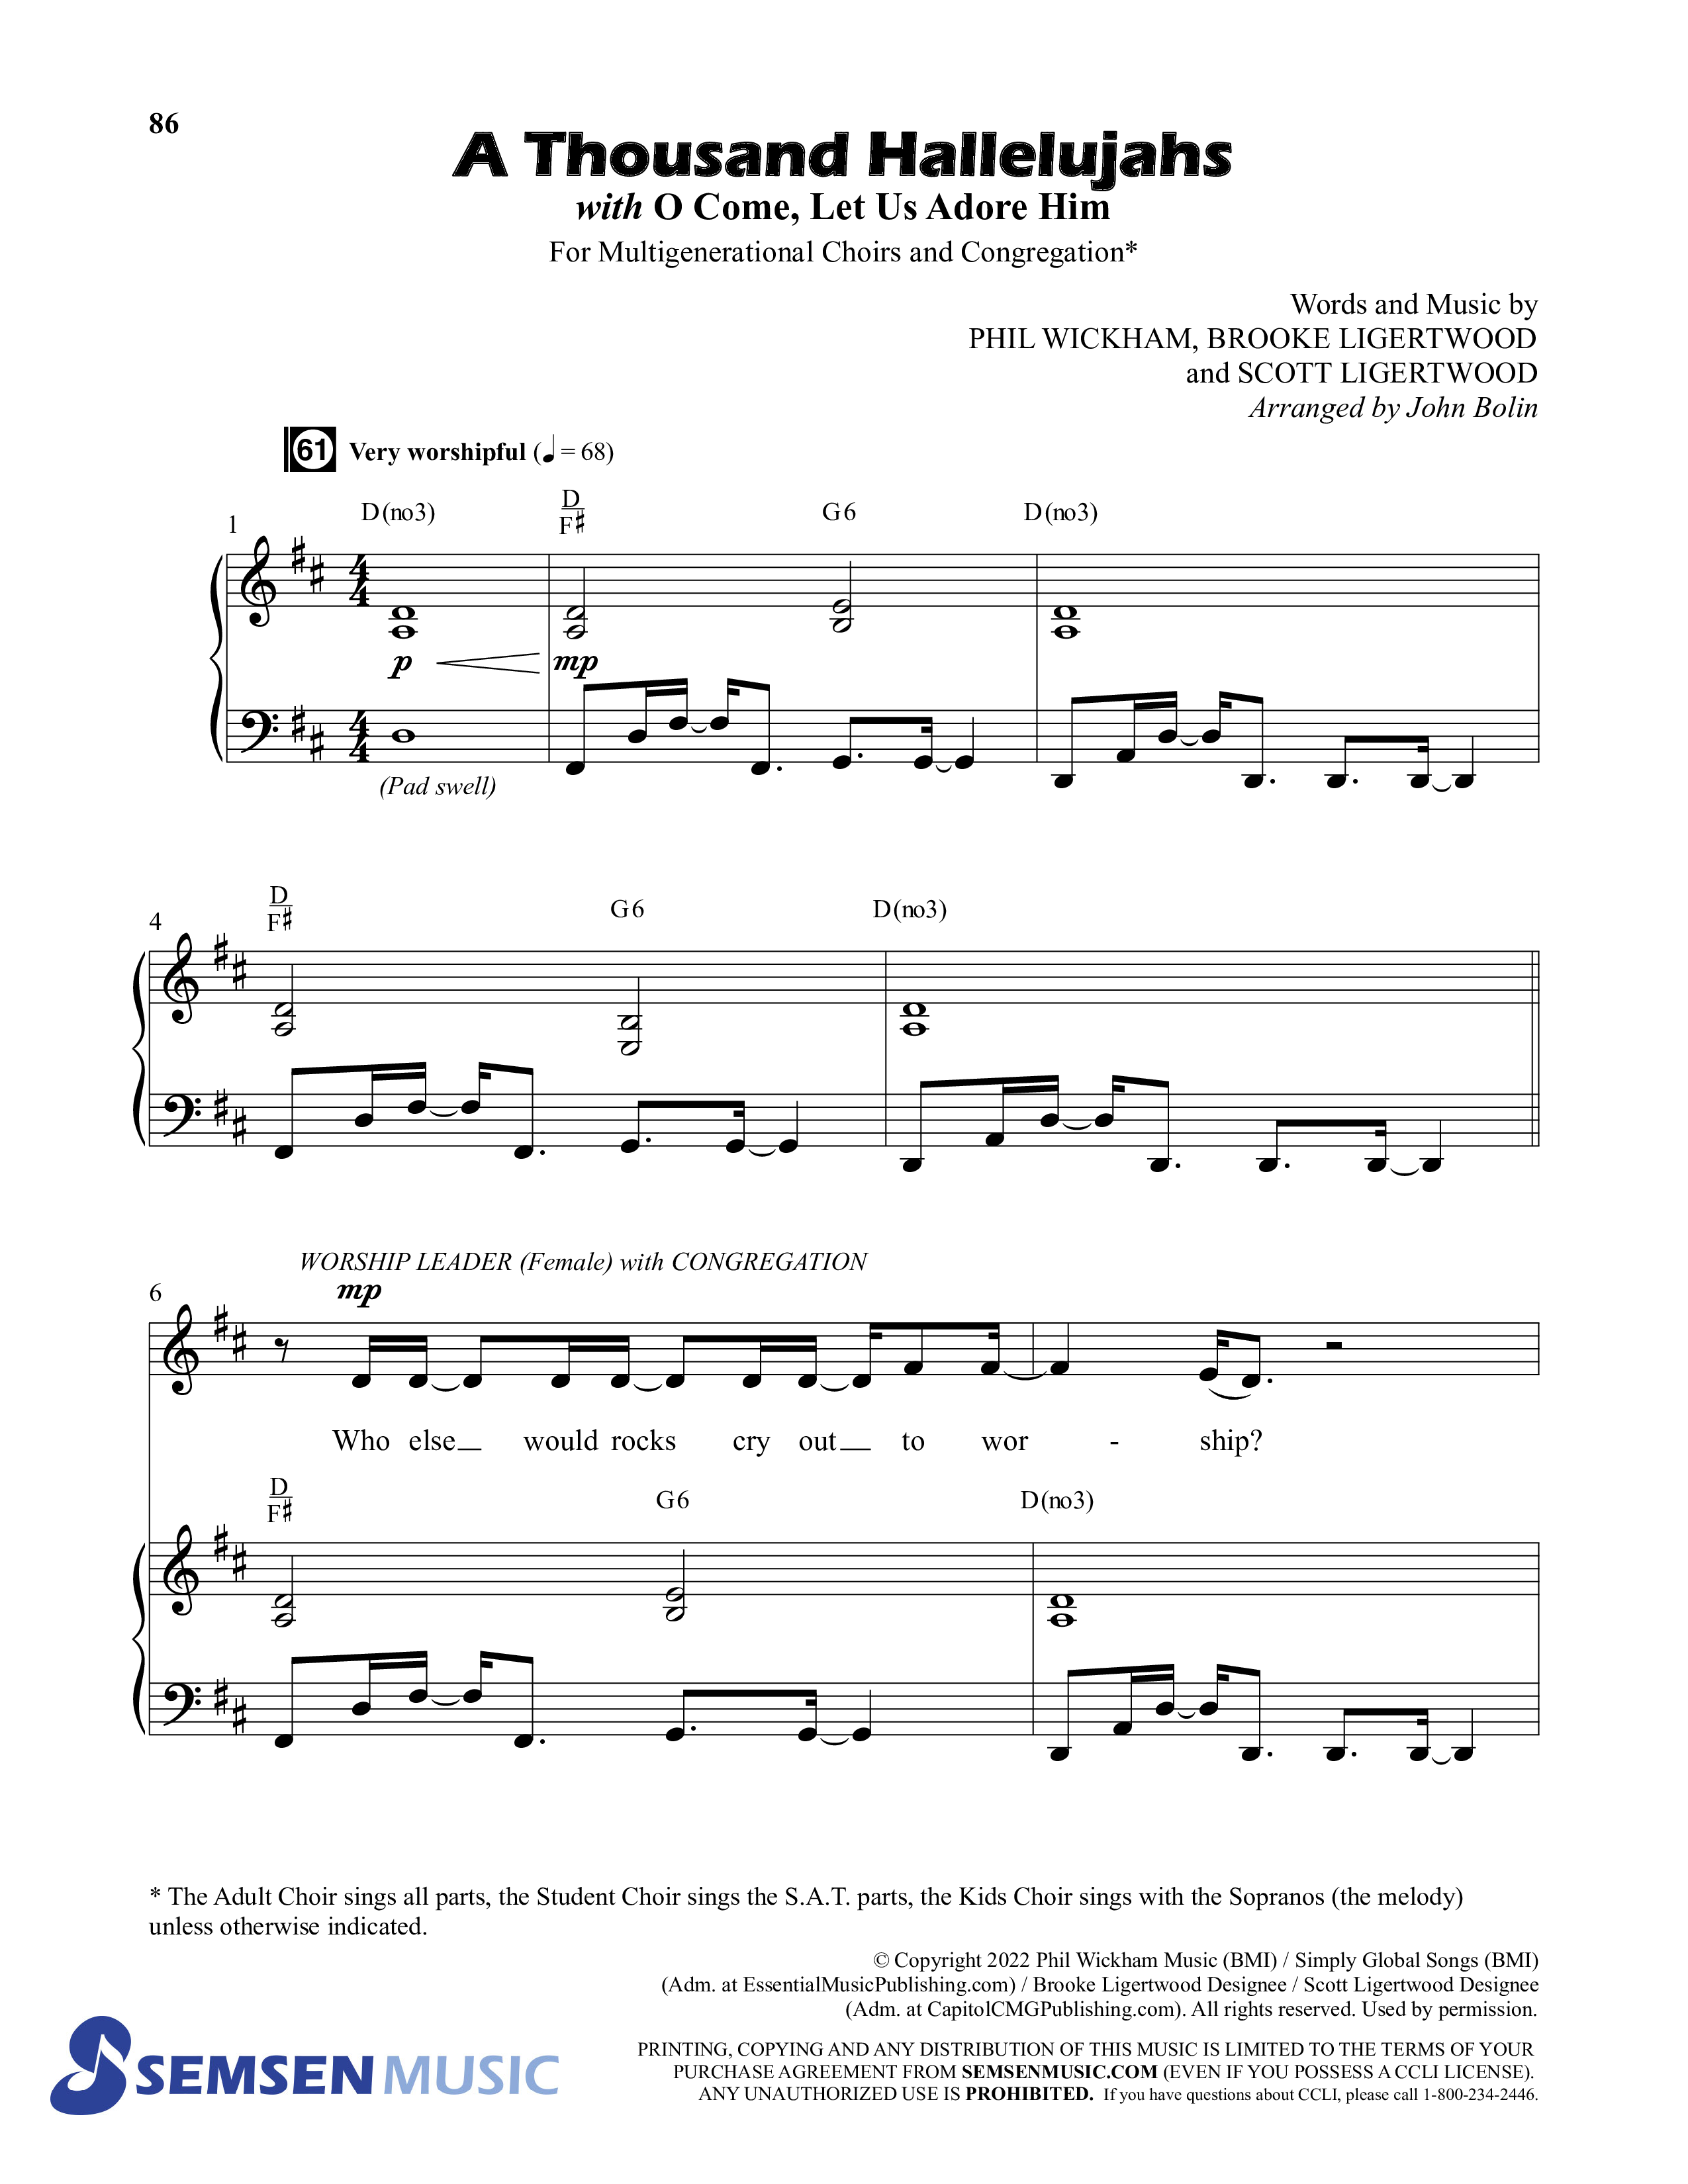 Wonderful (8 Song Choral Collection) Song 7 (Piano SATB) (Semsen Music / Arr. John Bolin / Orch. Cliff Duren)